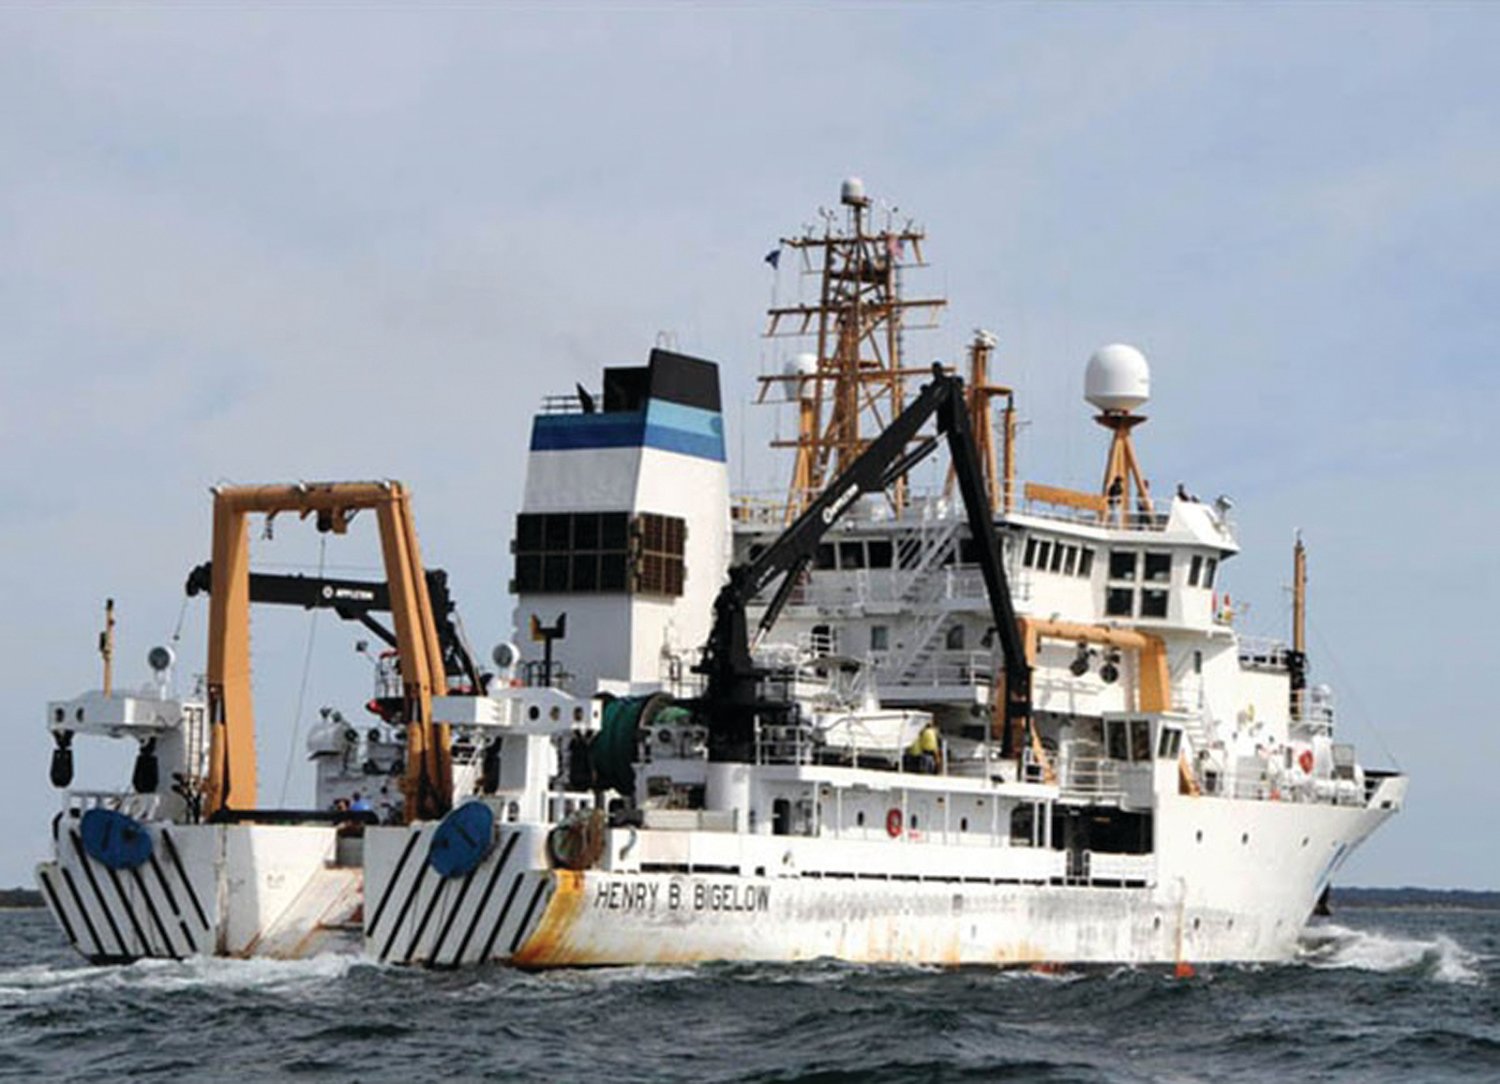 WHAT’S THE CATCH: The Henry B. Bigelow is one of NOAA’s fisheries research vessels.